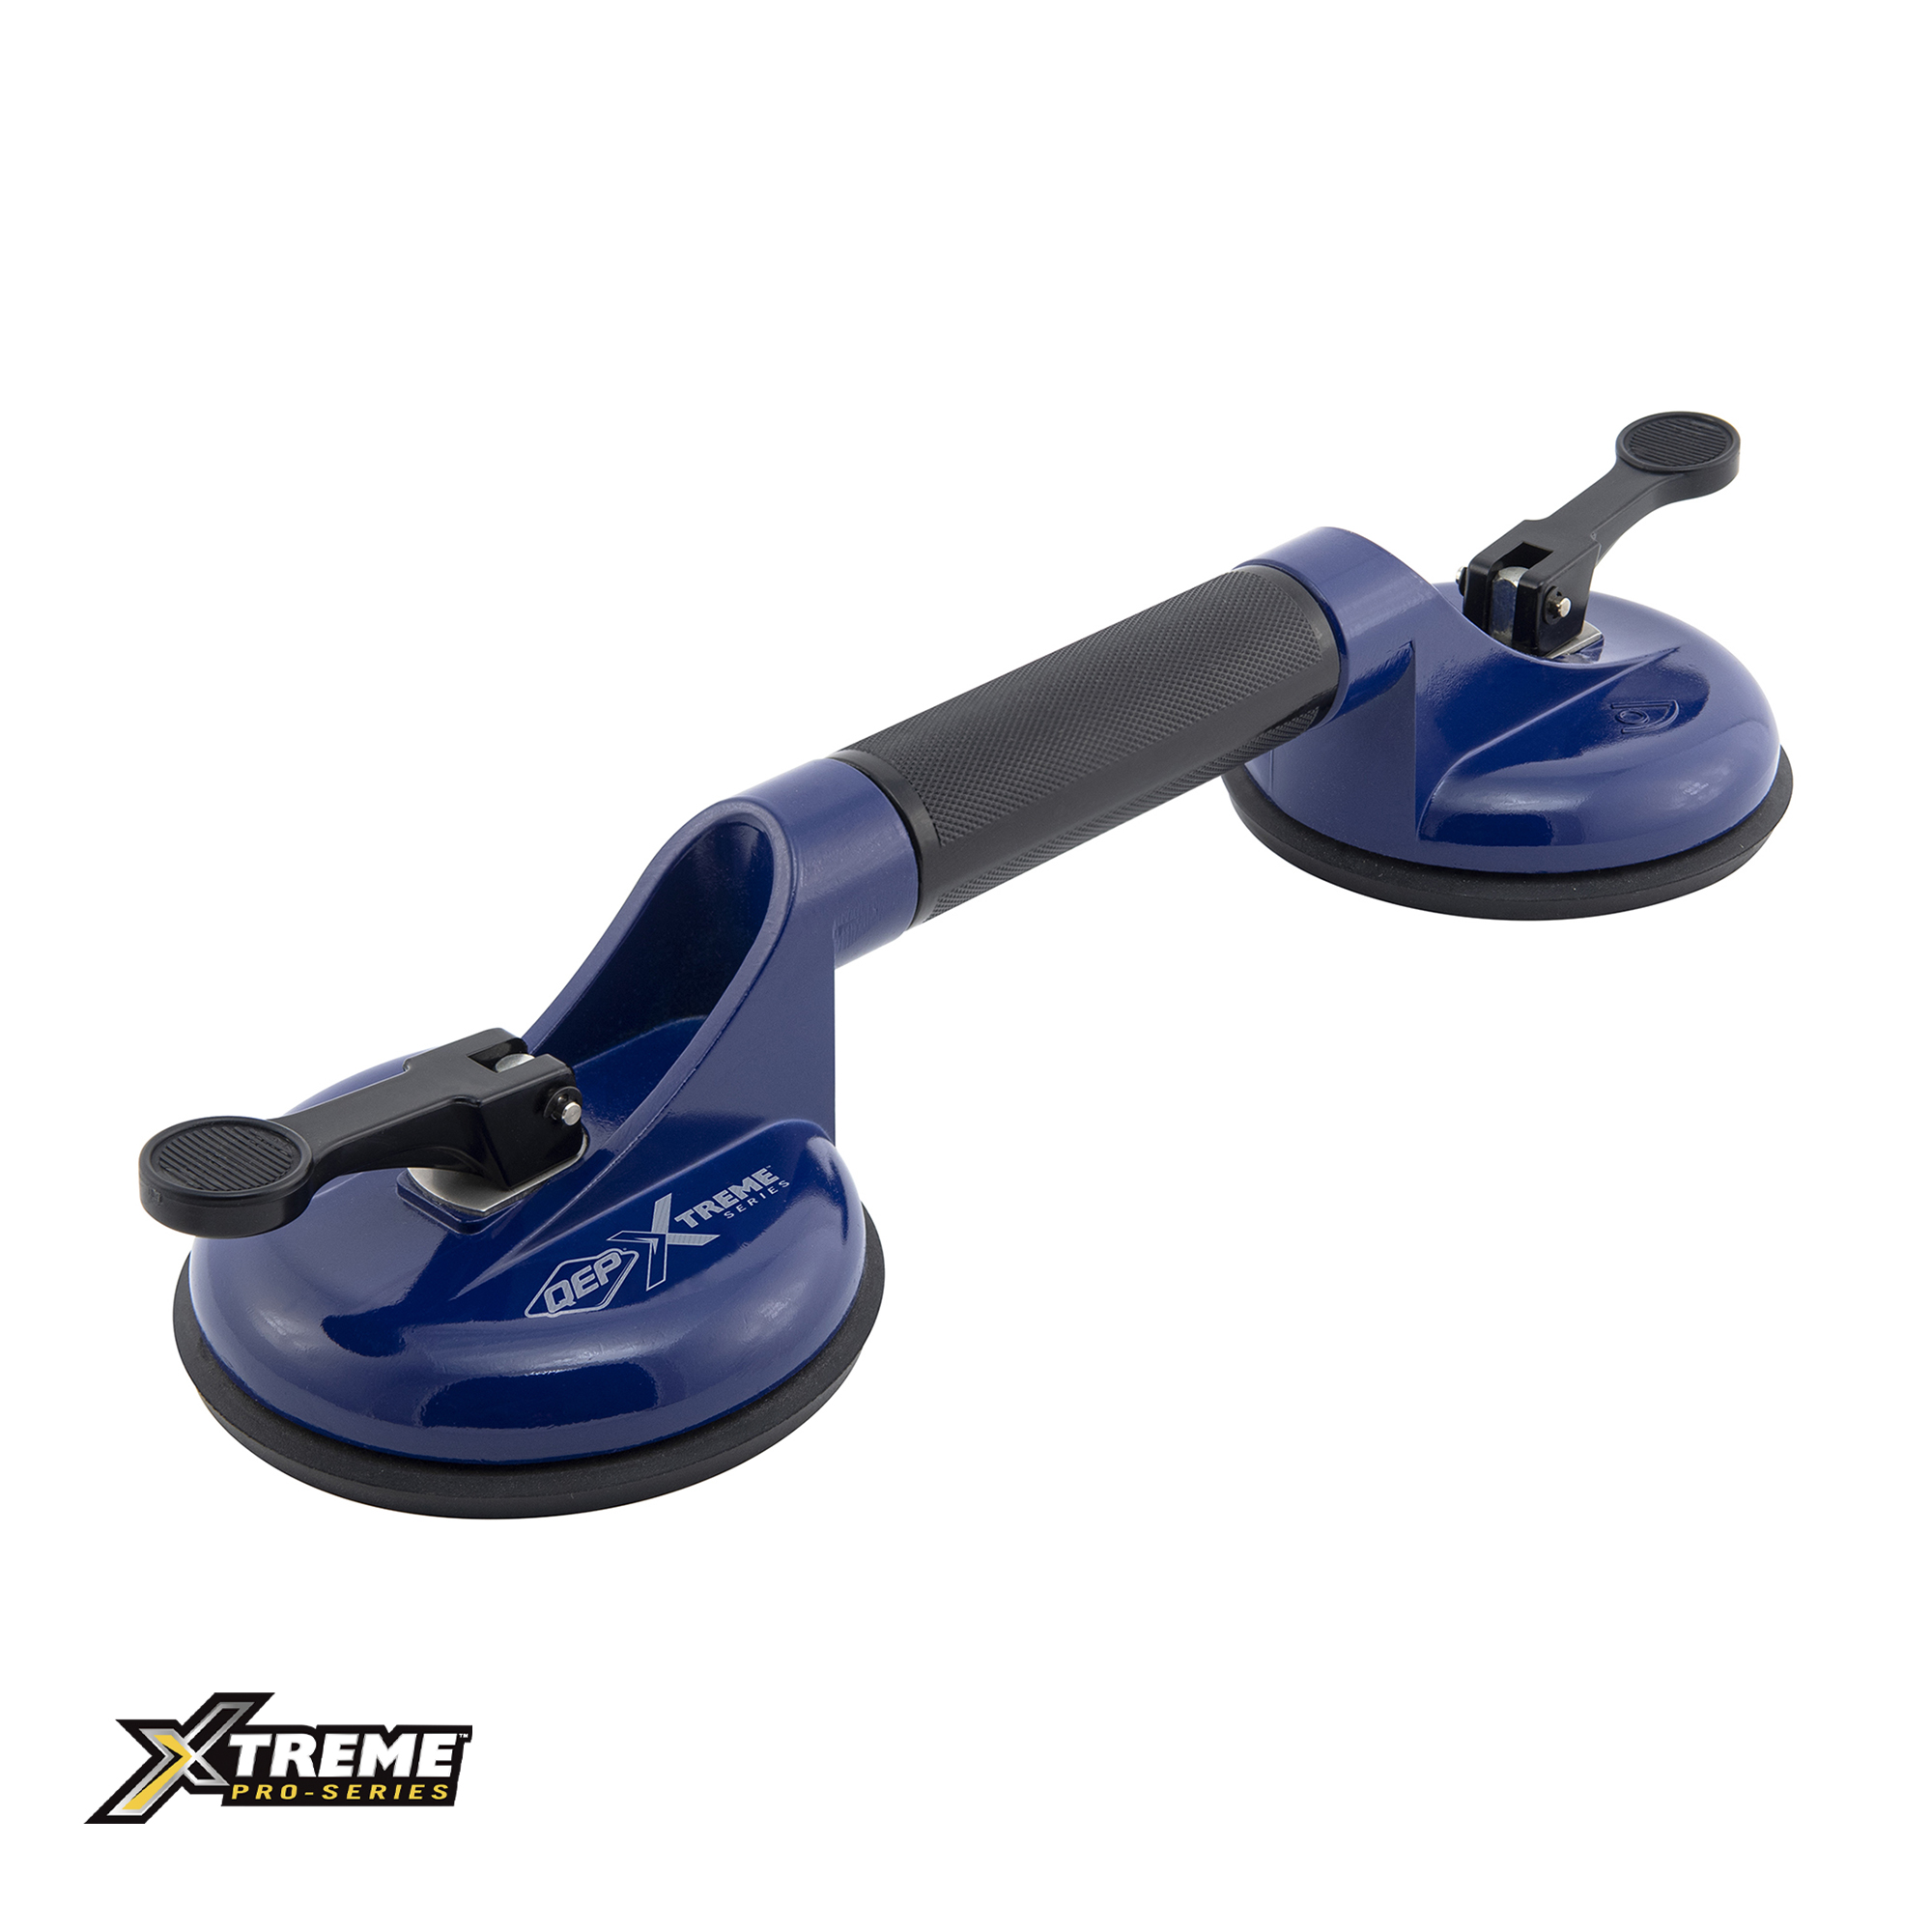 Xtreme Double Suction Cup